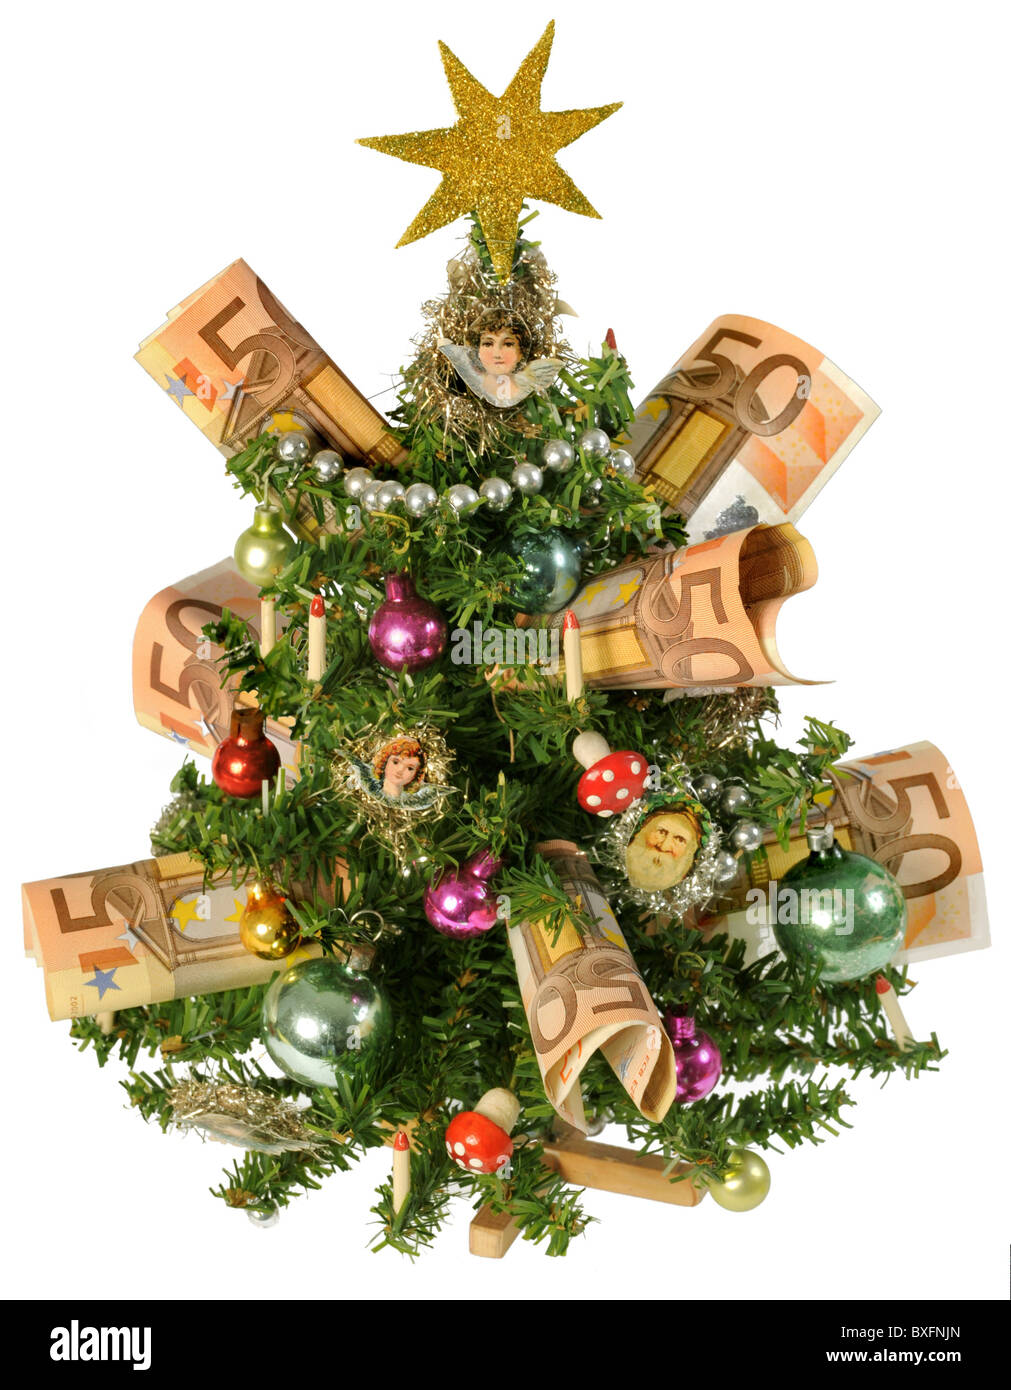 Christmas, Christmas tree with money, symbol image, Additional-Rights-Clearance-Info-Not-Available Stock Photo